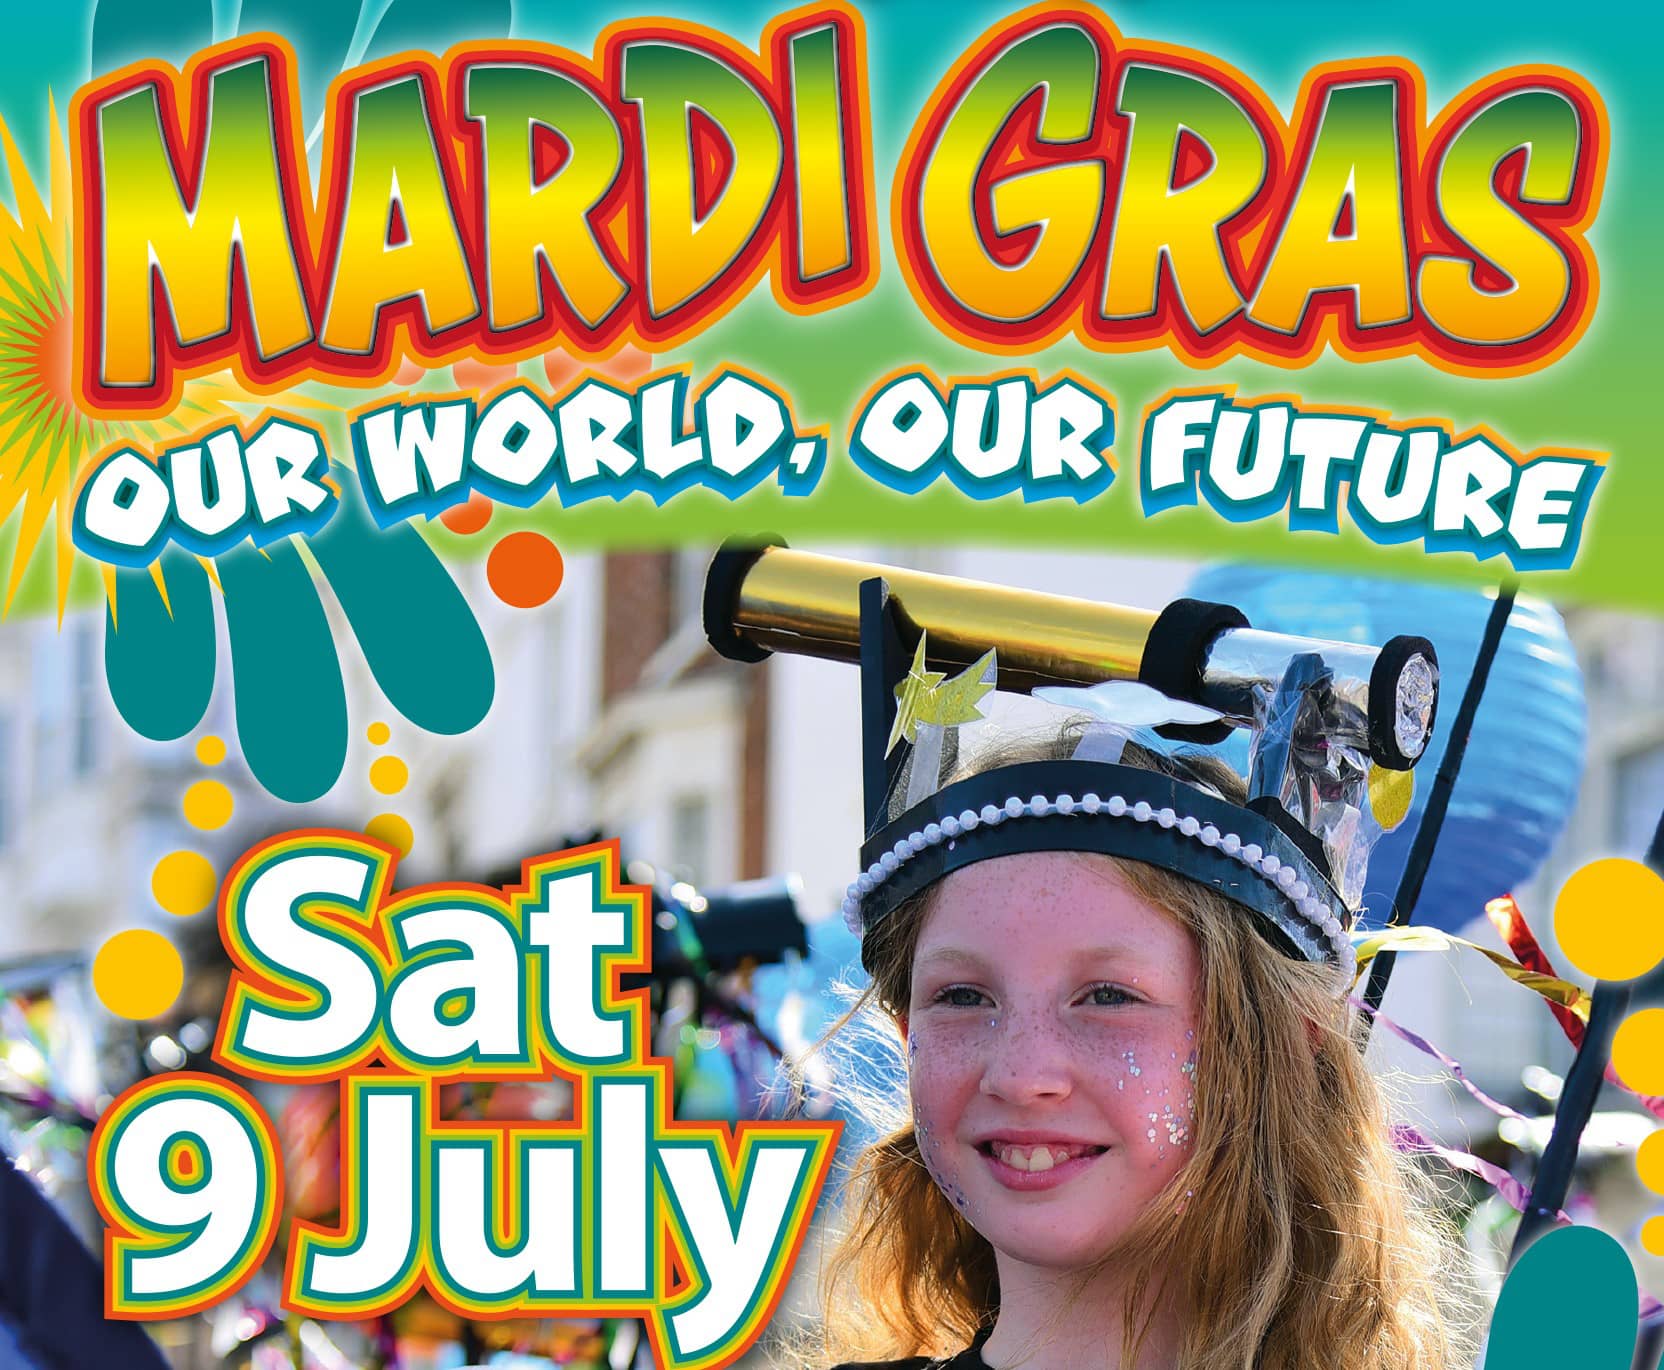 Poster showing young girl's smiling face and the word Mardi Gras, Our World, Our FutureOur World Our Future